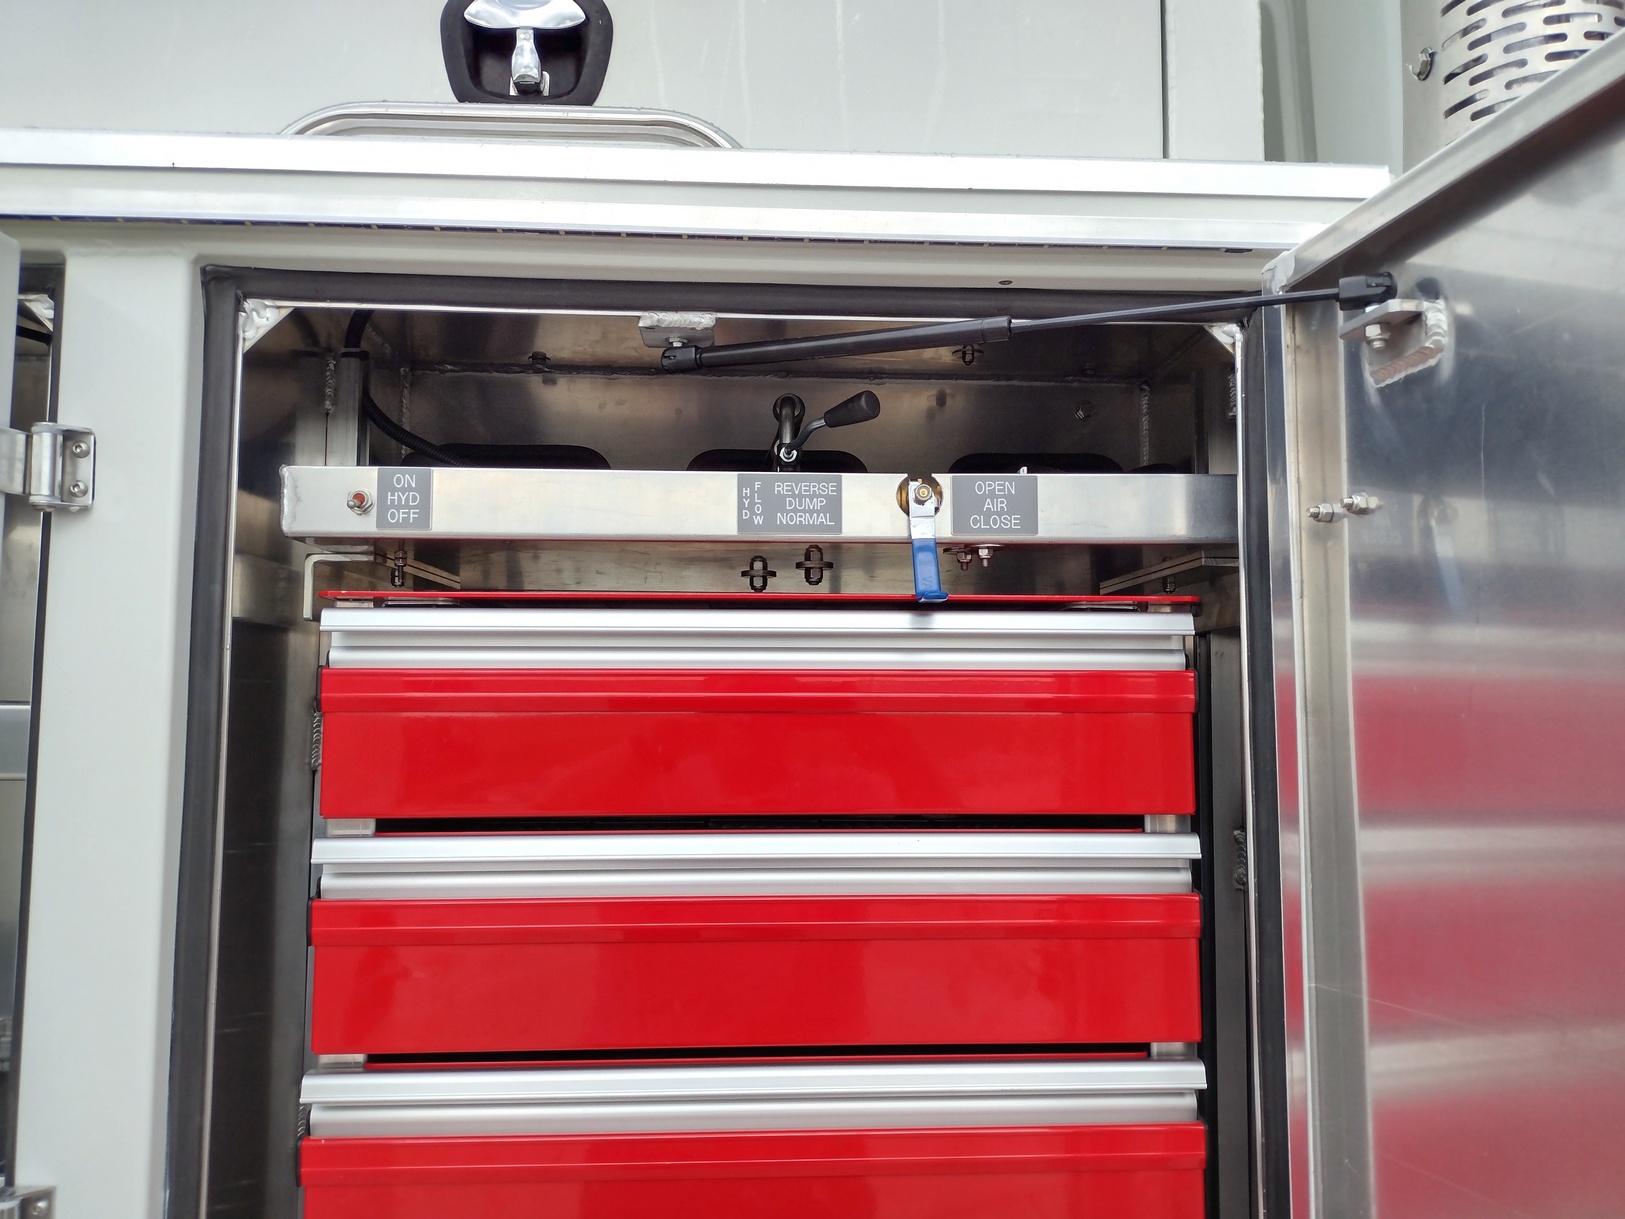 View from right side of a truck into an aluminum service body compartment with electric, acetylene, and air hose reel controls